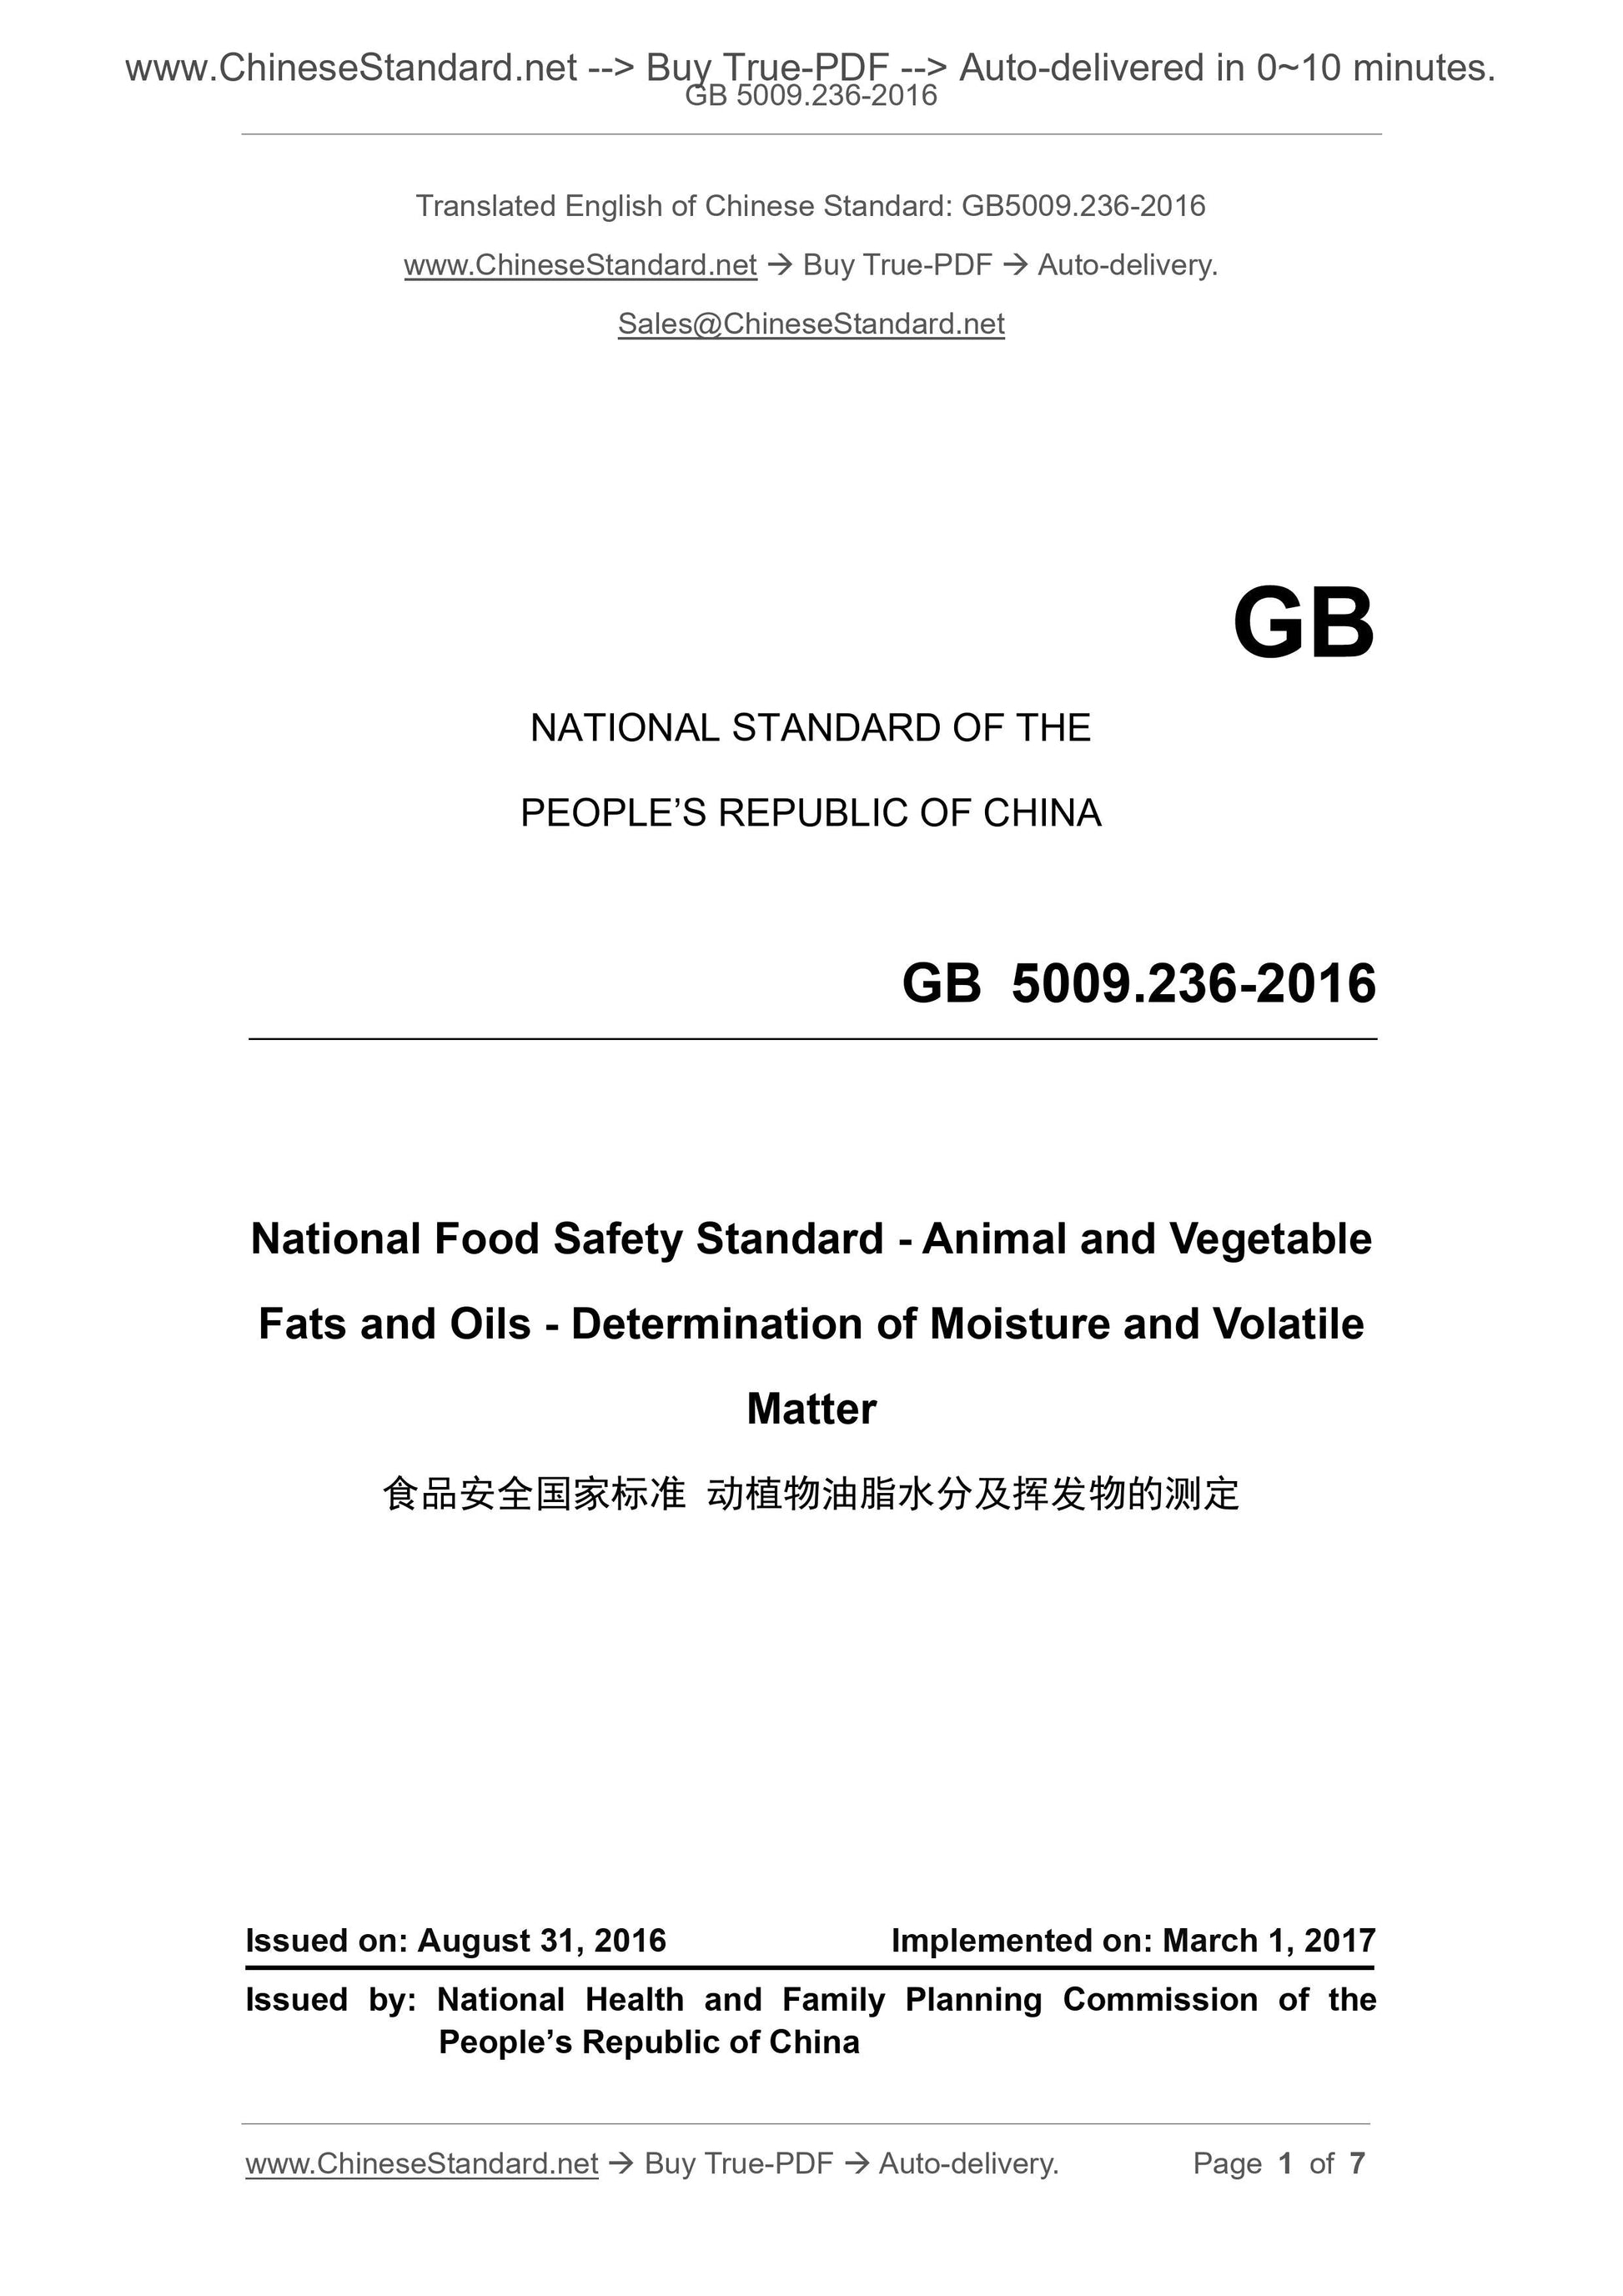 GB 5009.236-2016 Page 1